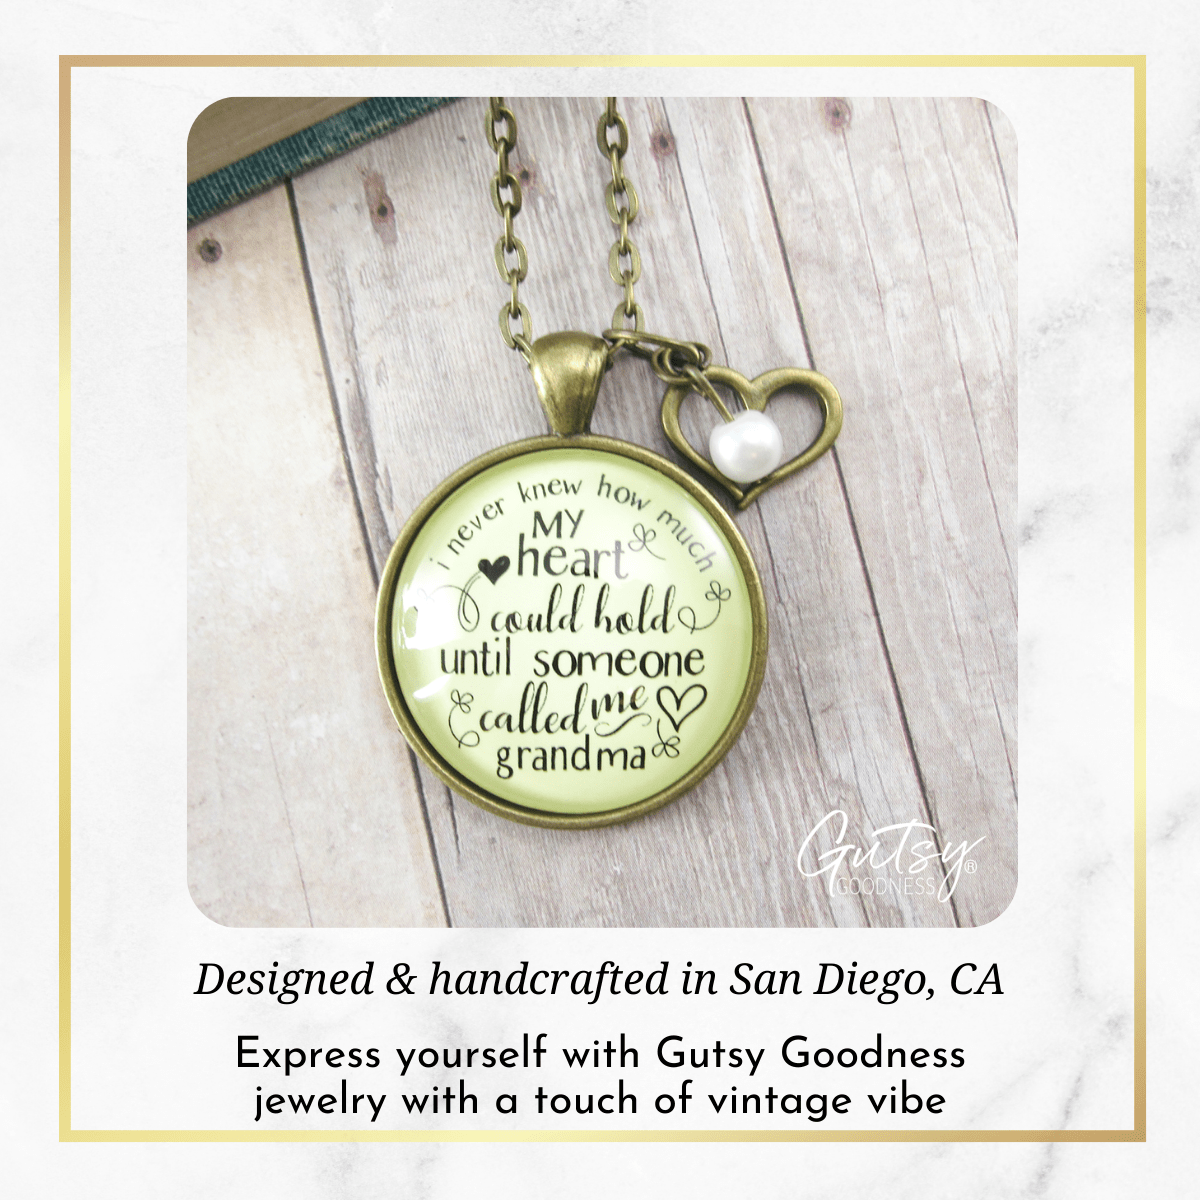 Gutsy Goodness New Grandma Necklace Never Knew Heart Hold Grandmother Jewelry Gift - Gutsy Goodness Handmade Jewelry;New Grandma Necklace Never Knew Heart Hold Grandmother Jewelry Gift - Gutsy Goodness Handmade Jewelry Gifts